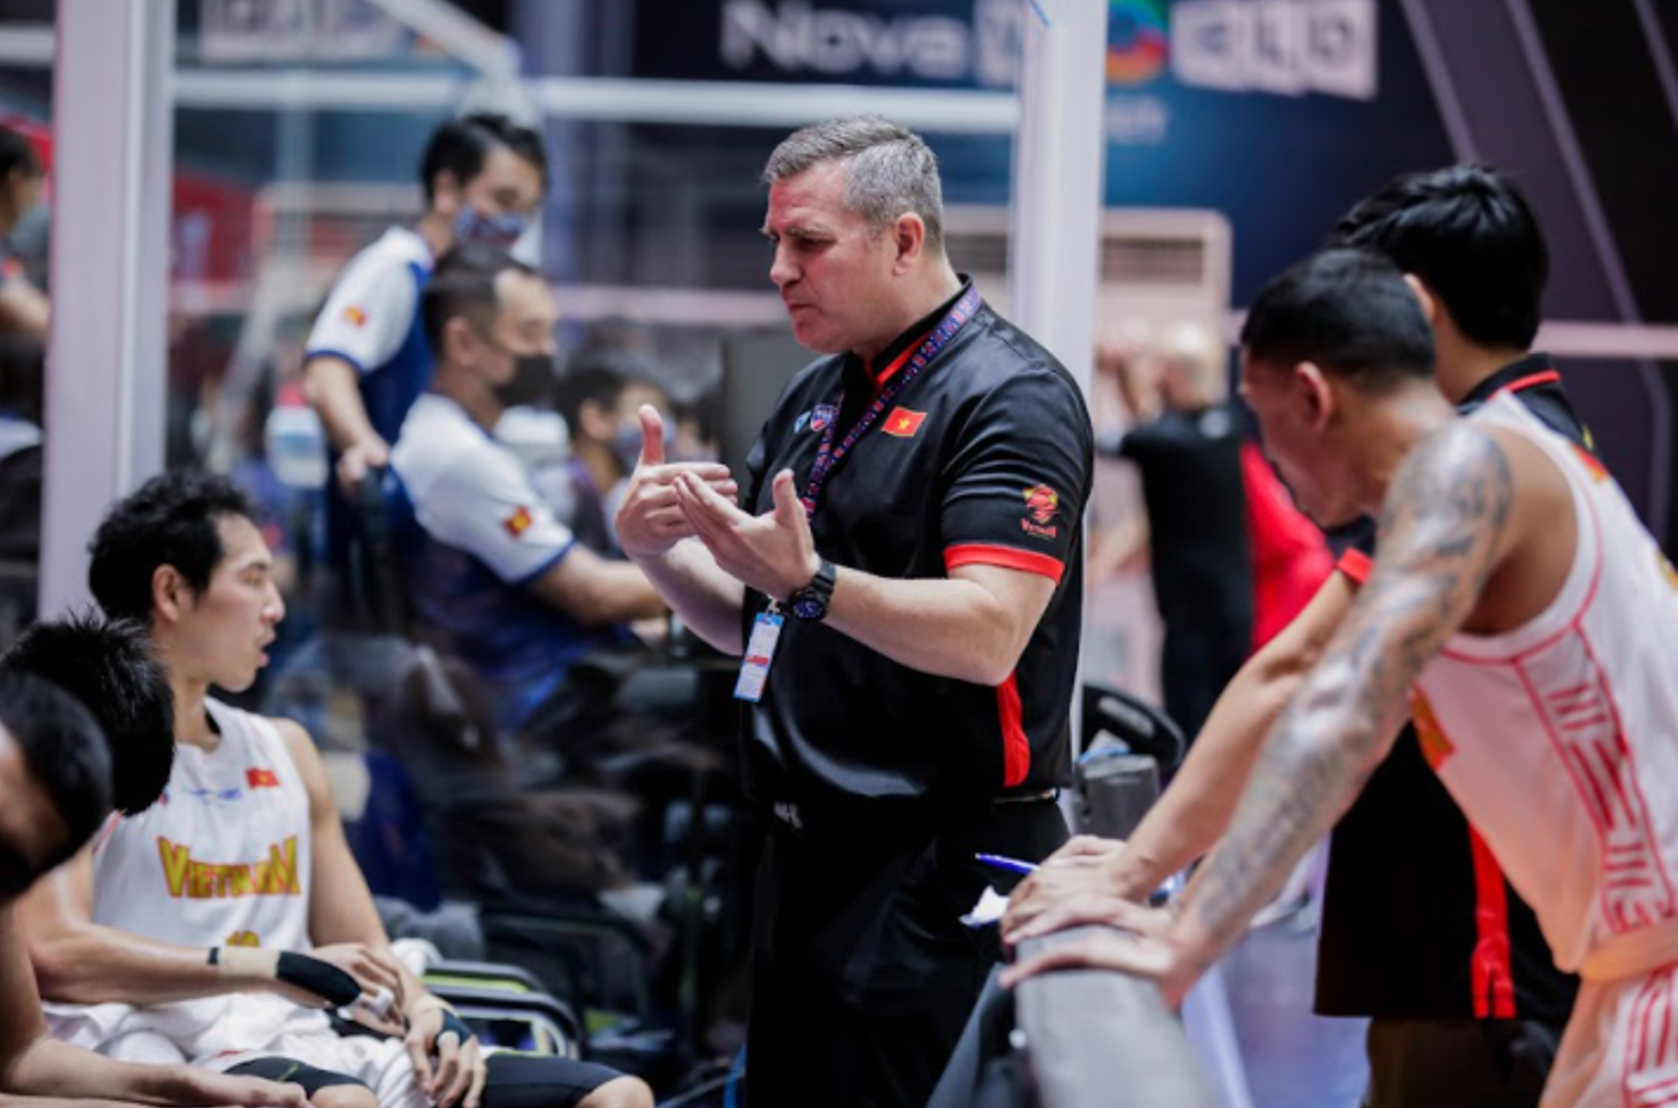 The Vietnamese national basketball team’s coach Kevin Yurkus discusses a strategy with his players during a game at the VBA Premier Bubble Games 2021. Photo: VBA